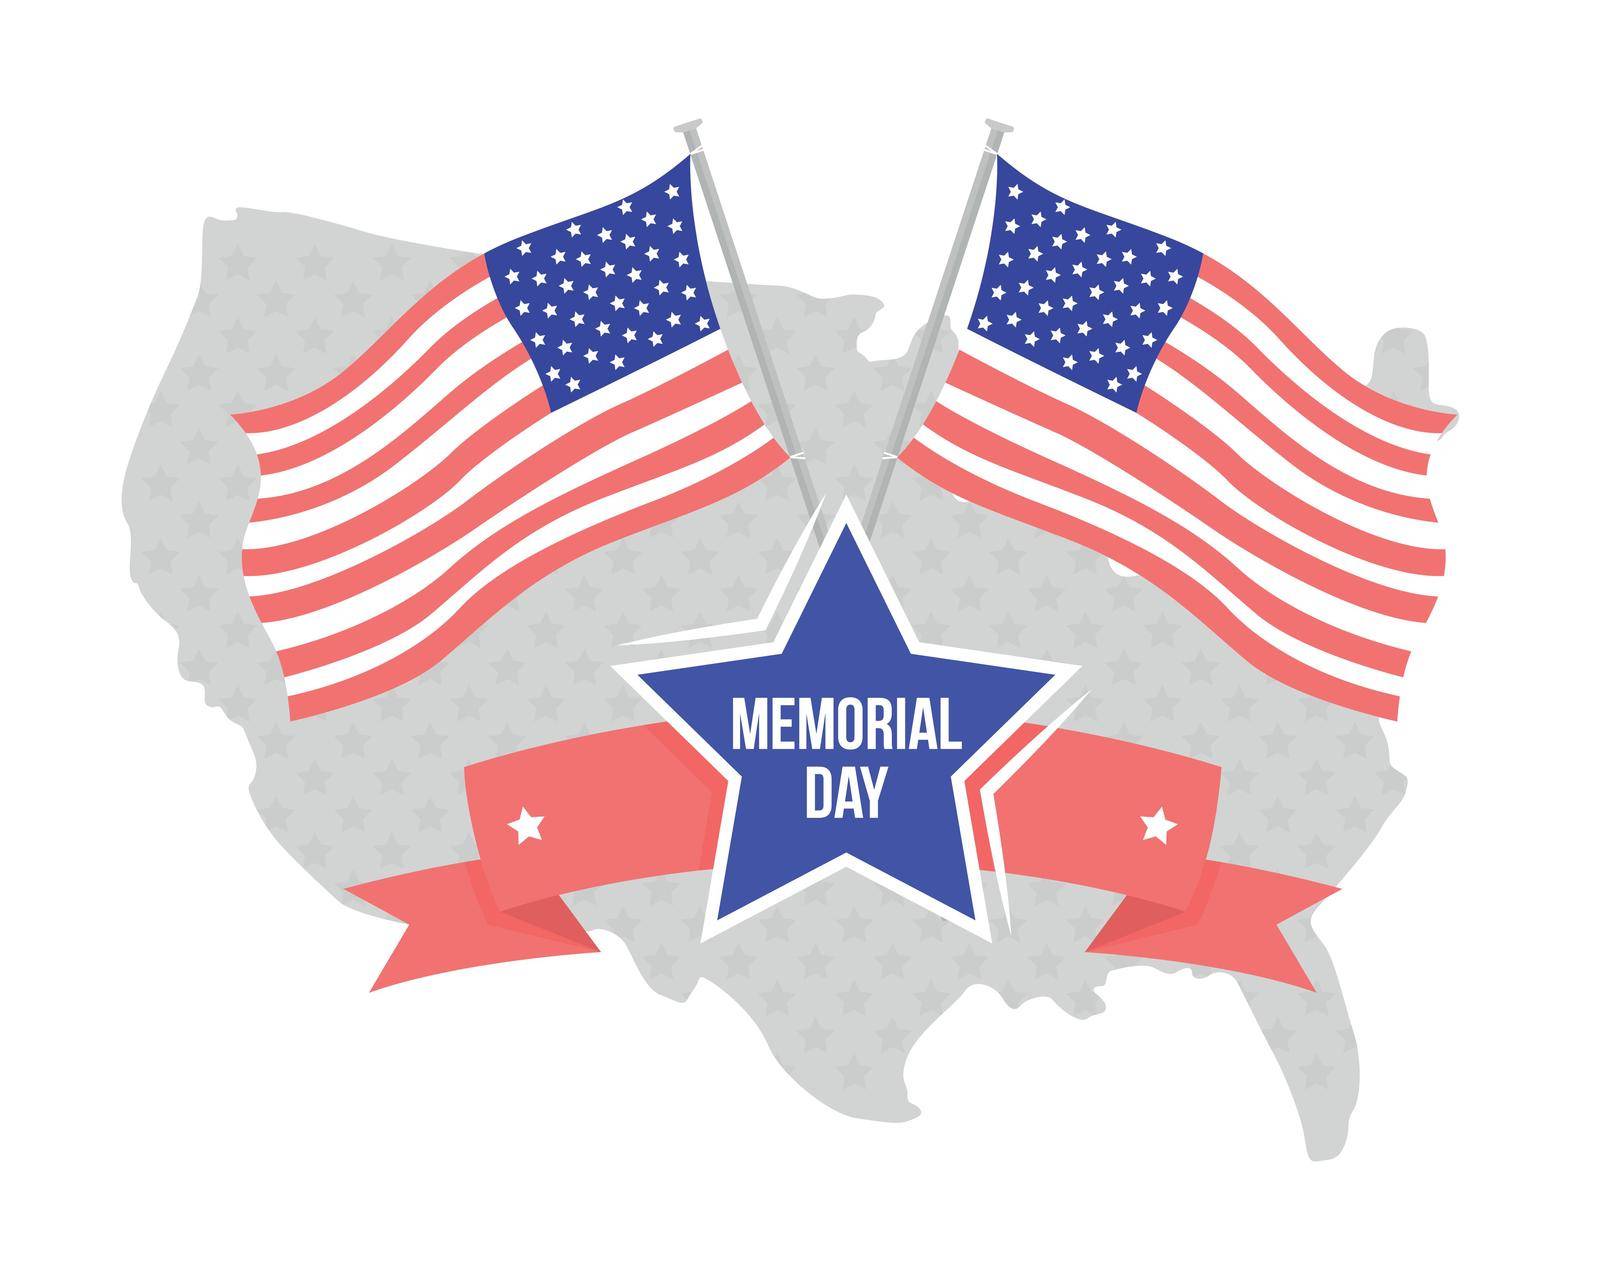 Memorial day 2D vector isolated illustration by ntl